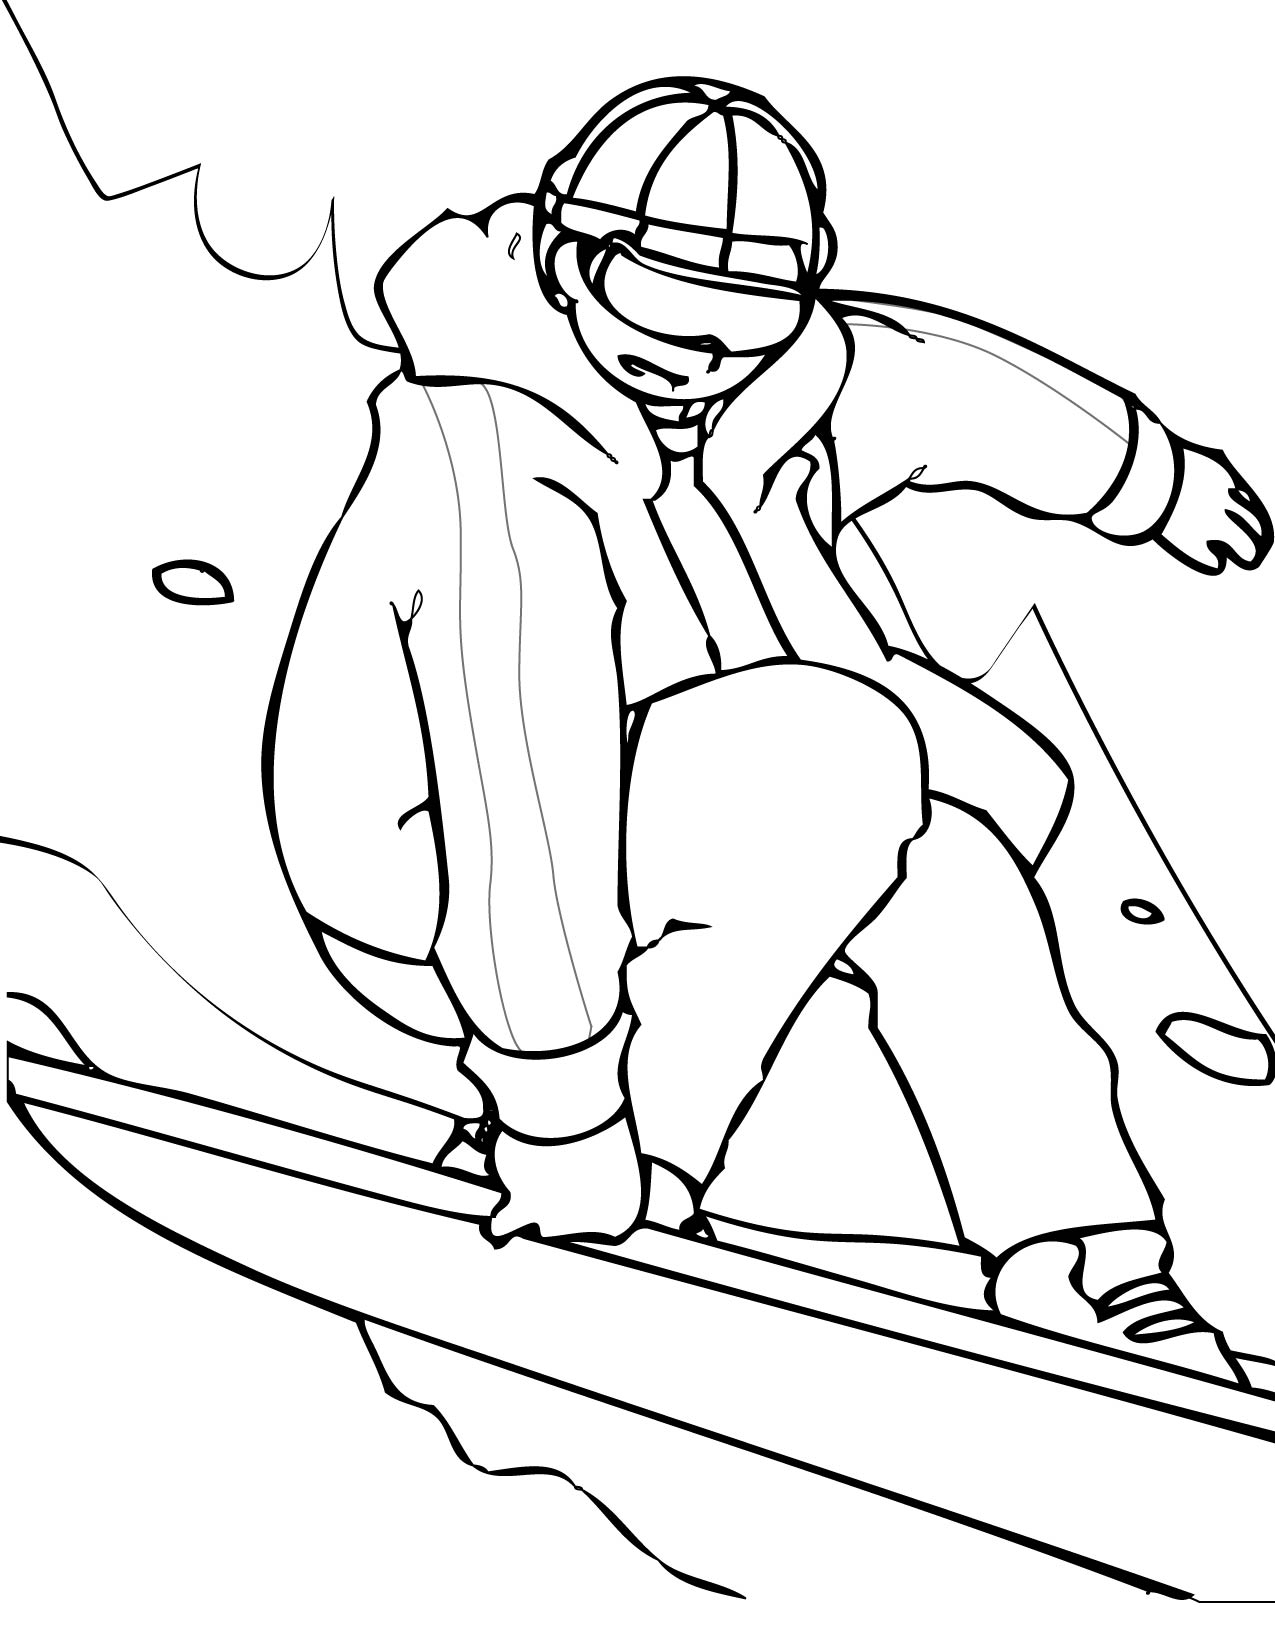 Winter Sports Coloring Pages 29 